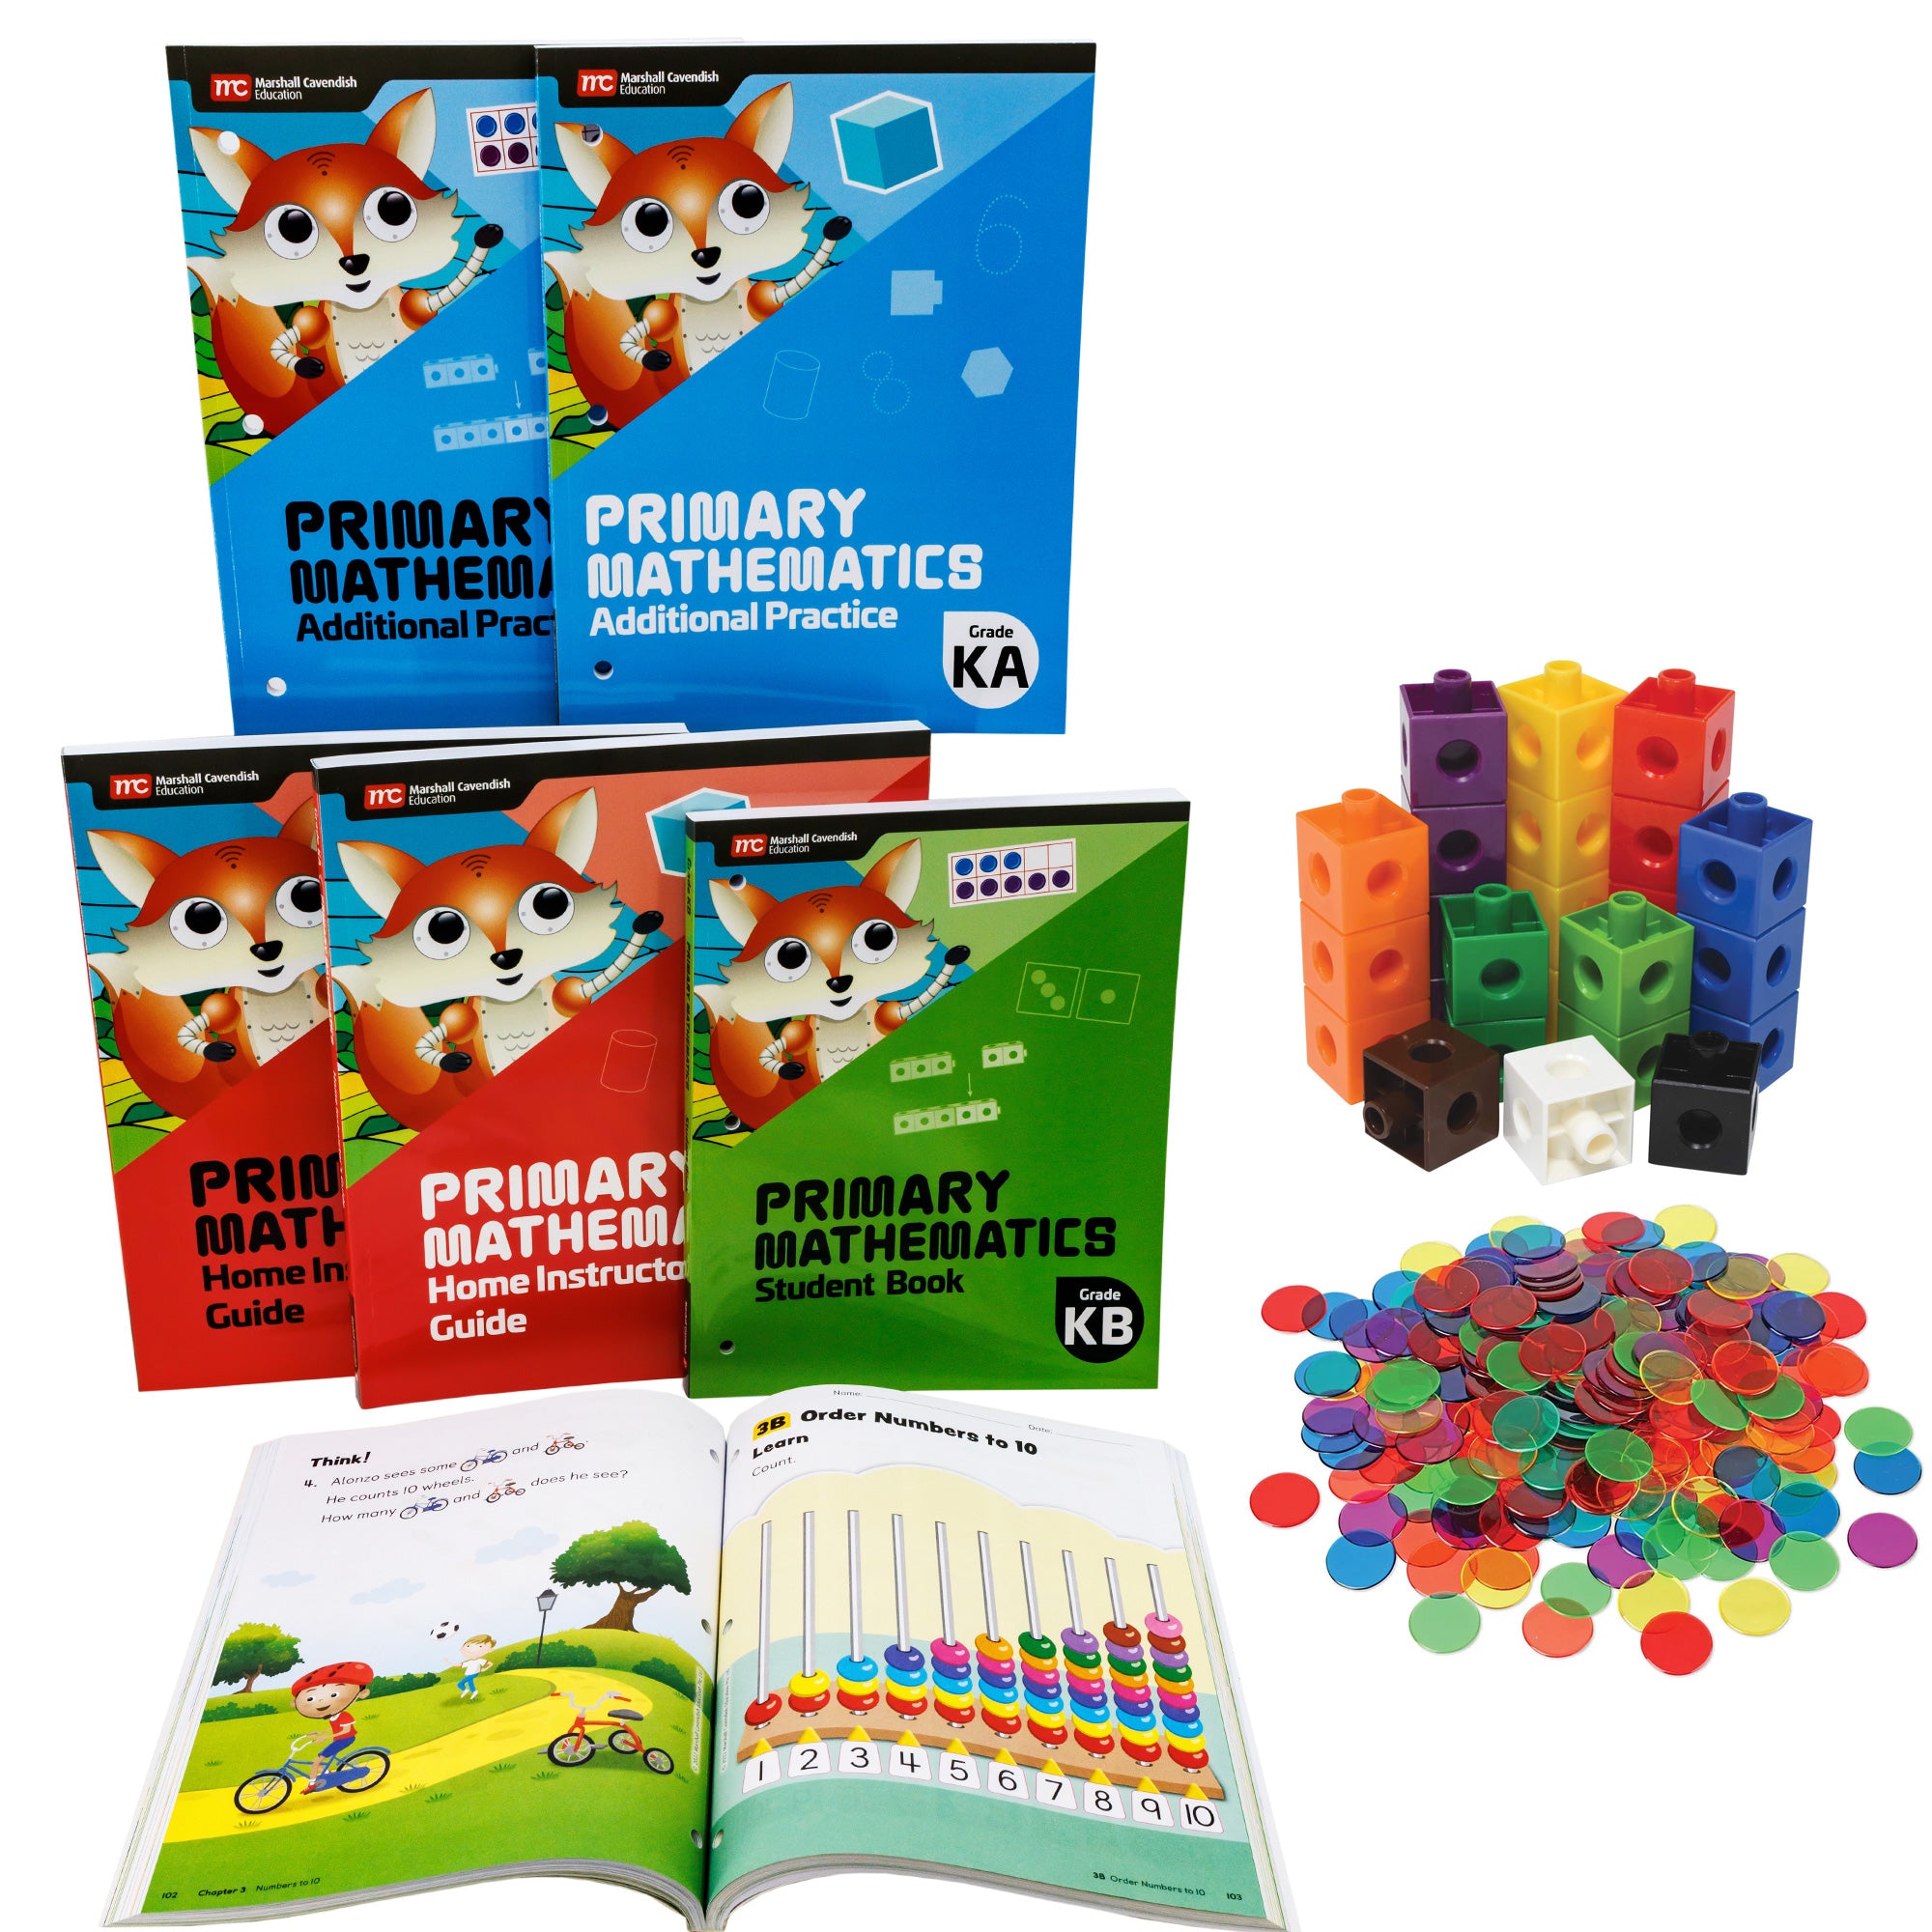 Singapore Primary Mathematics Kindergarten Set. Set of 6 books with a fox on each cover. On the top are 2 blue books. In the middle are 3 books, 2 red and 1 green. On the bottom is one open book showing a boy riding a bike on the left page, and an abacus with colored beads on the right page. To the right of the books are manipulatives in a variety of colors; connected blocks with holes on the side of each piece and transparent round tokens.